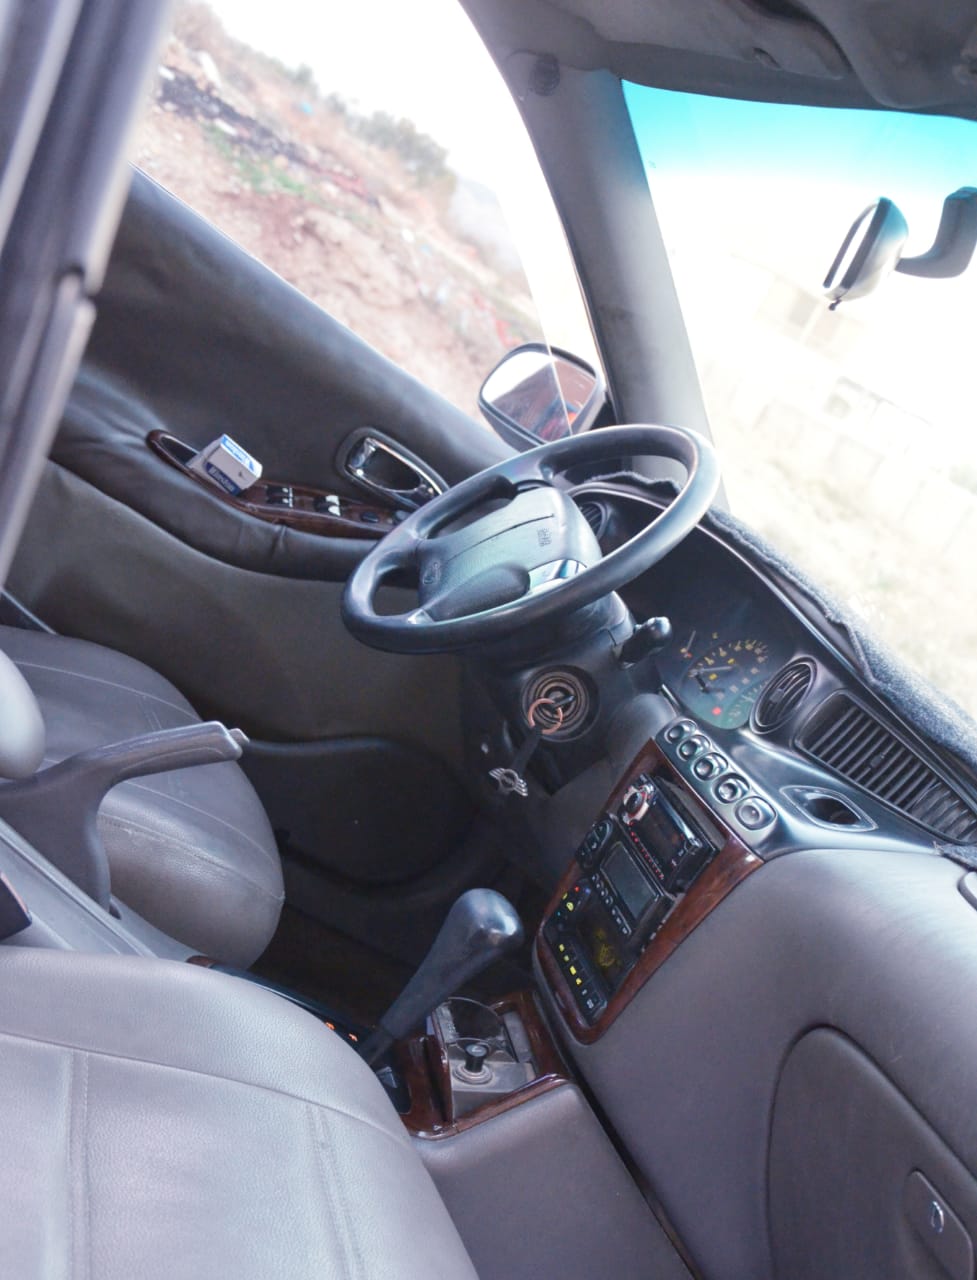 I am advertising my 2018 Lexus LX 570 for sale, the car is in perfect condition and it runs on low mileage, contact me for more information regarding the s-  دايو فل كامل قير اتومتك...